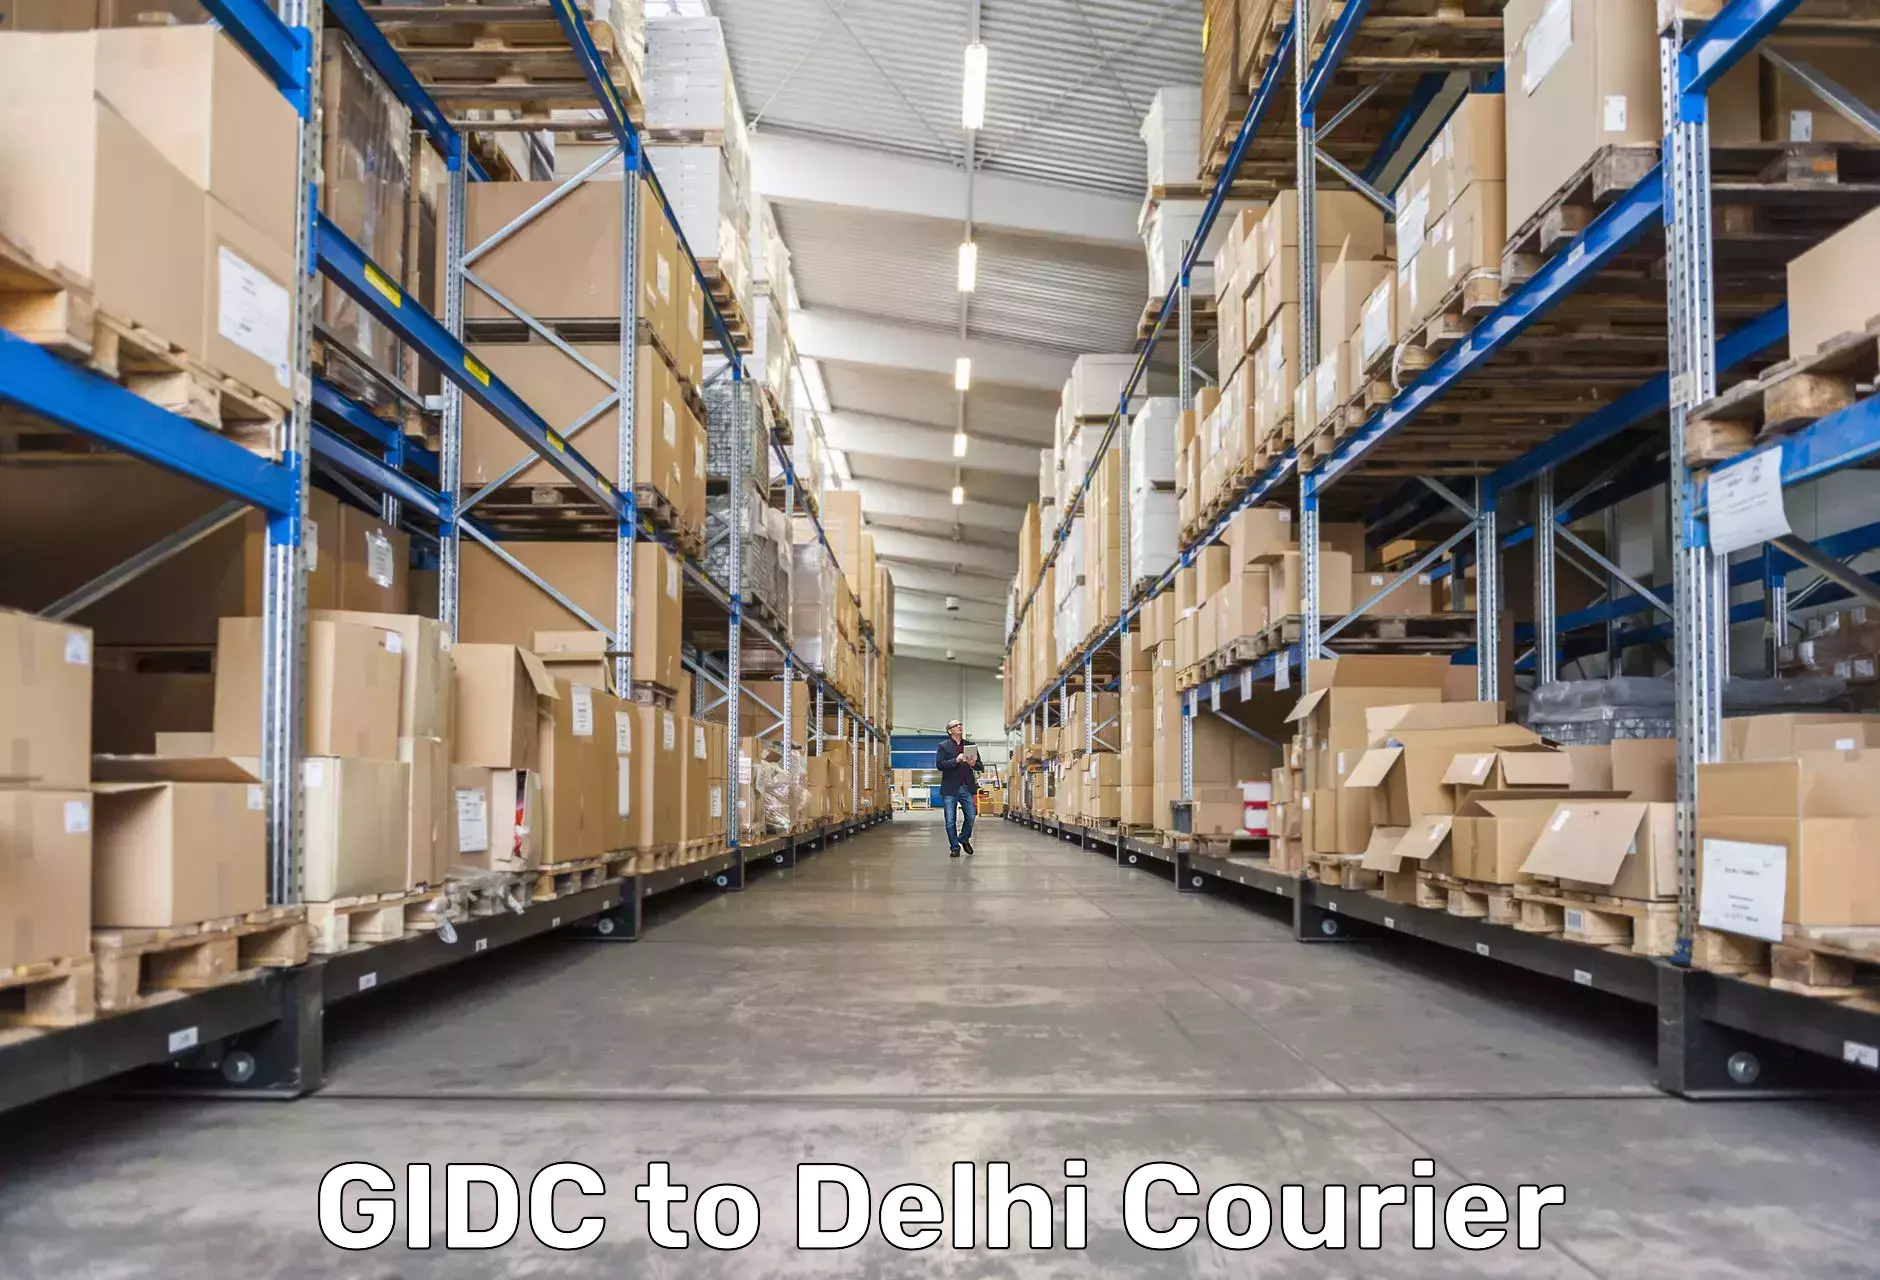 Courier service efficiency in GIDC to Delhi Technological University DTU